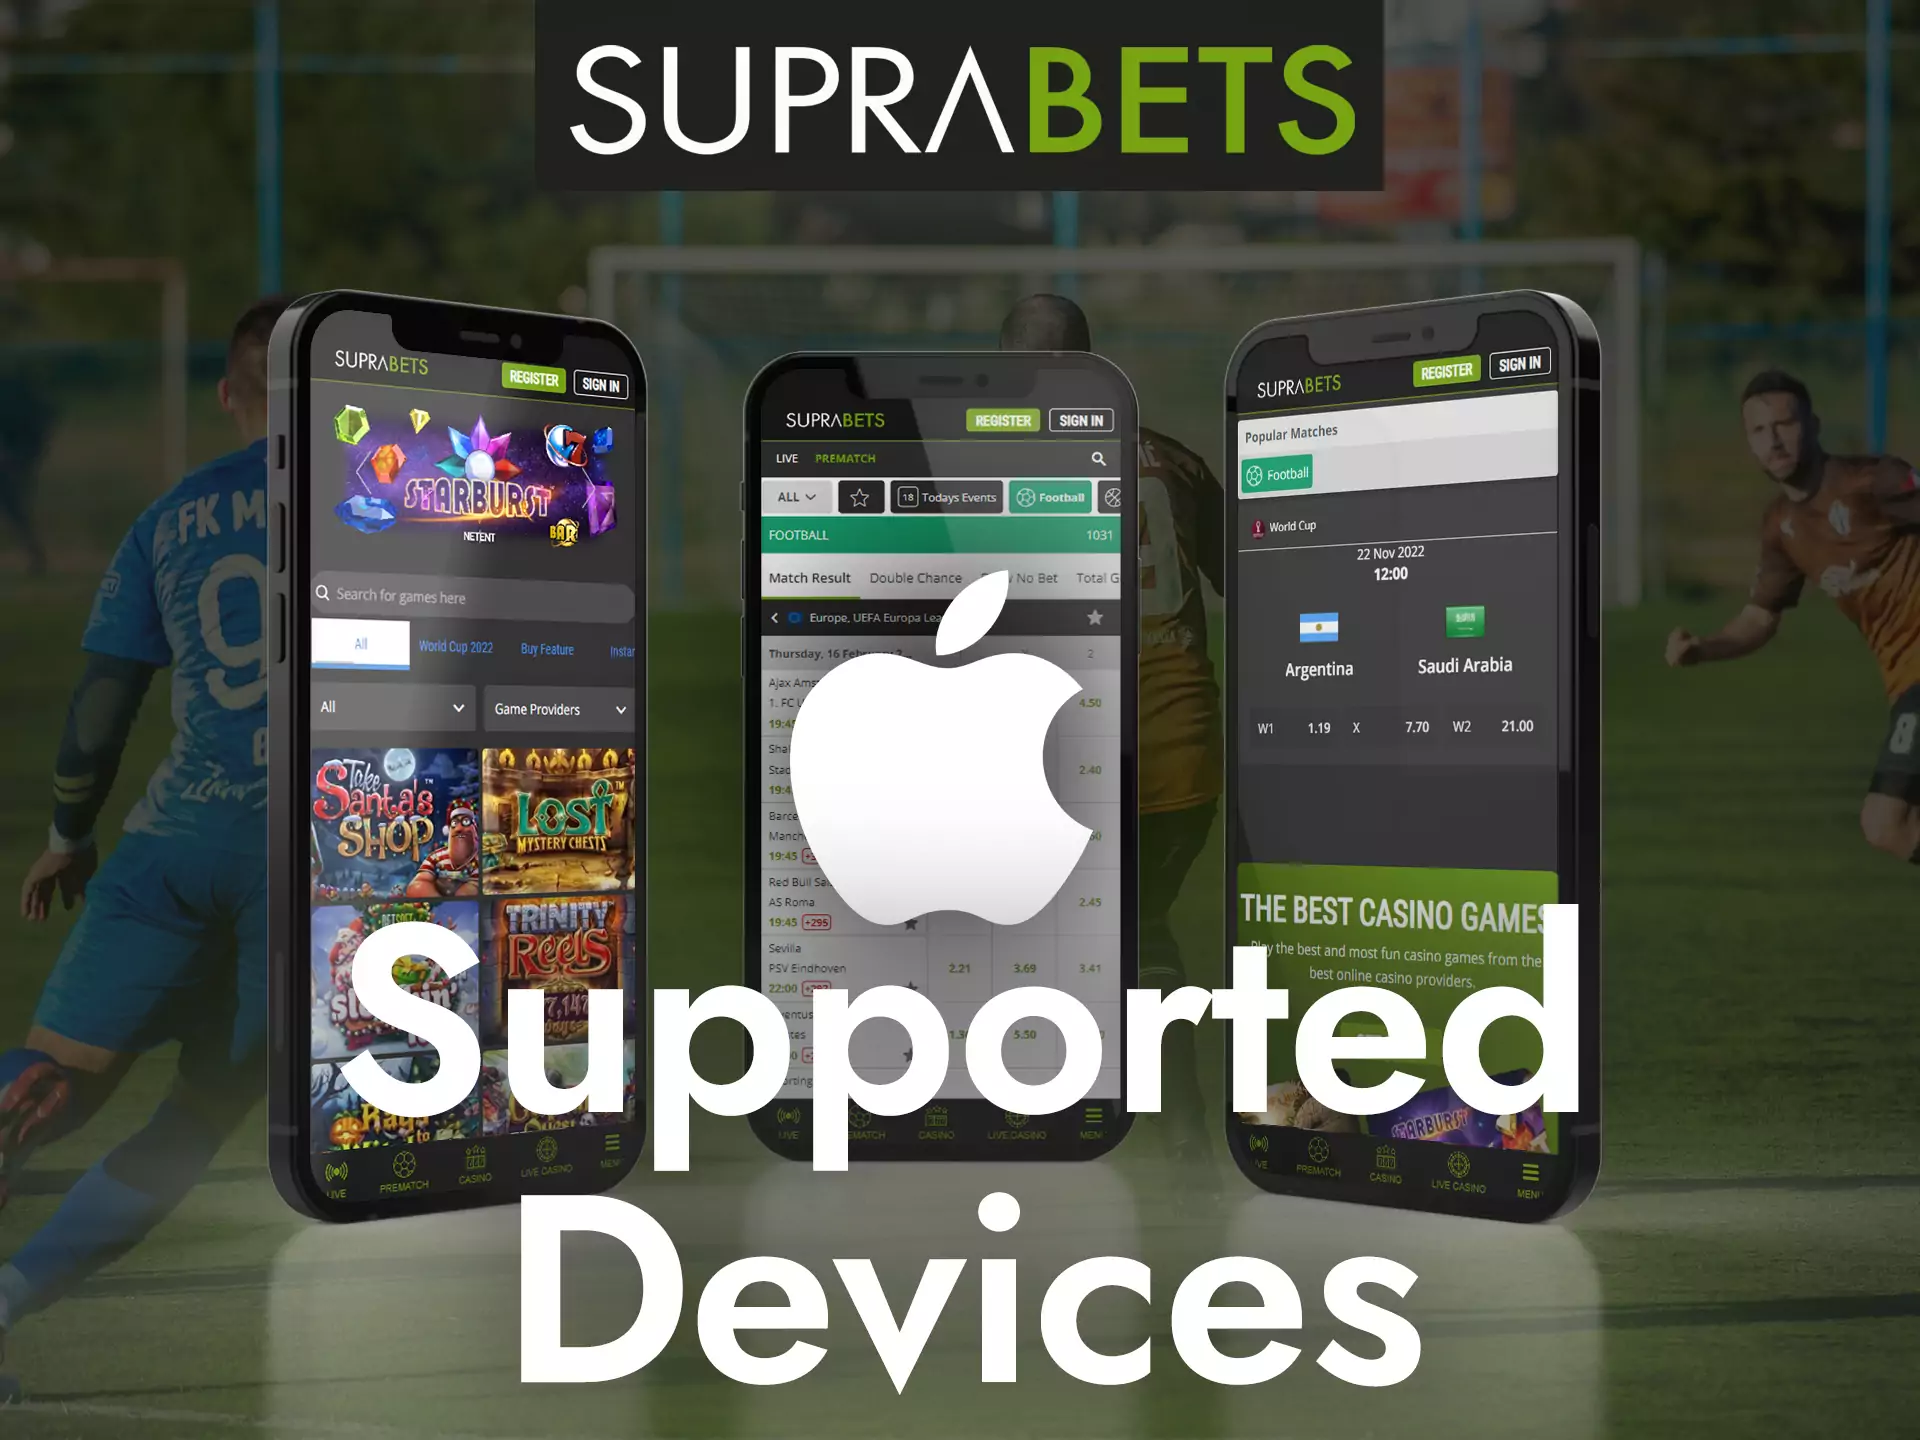 Suprabets offers all iOS users to join, many devices are supported.